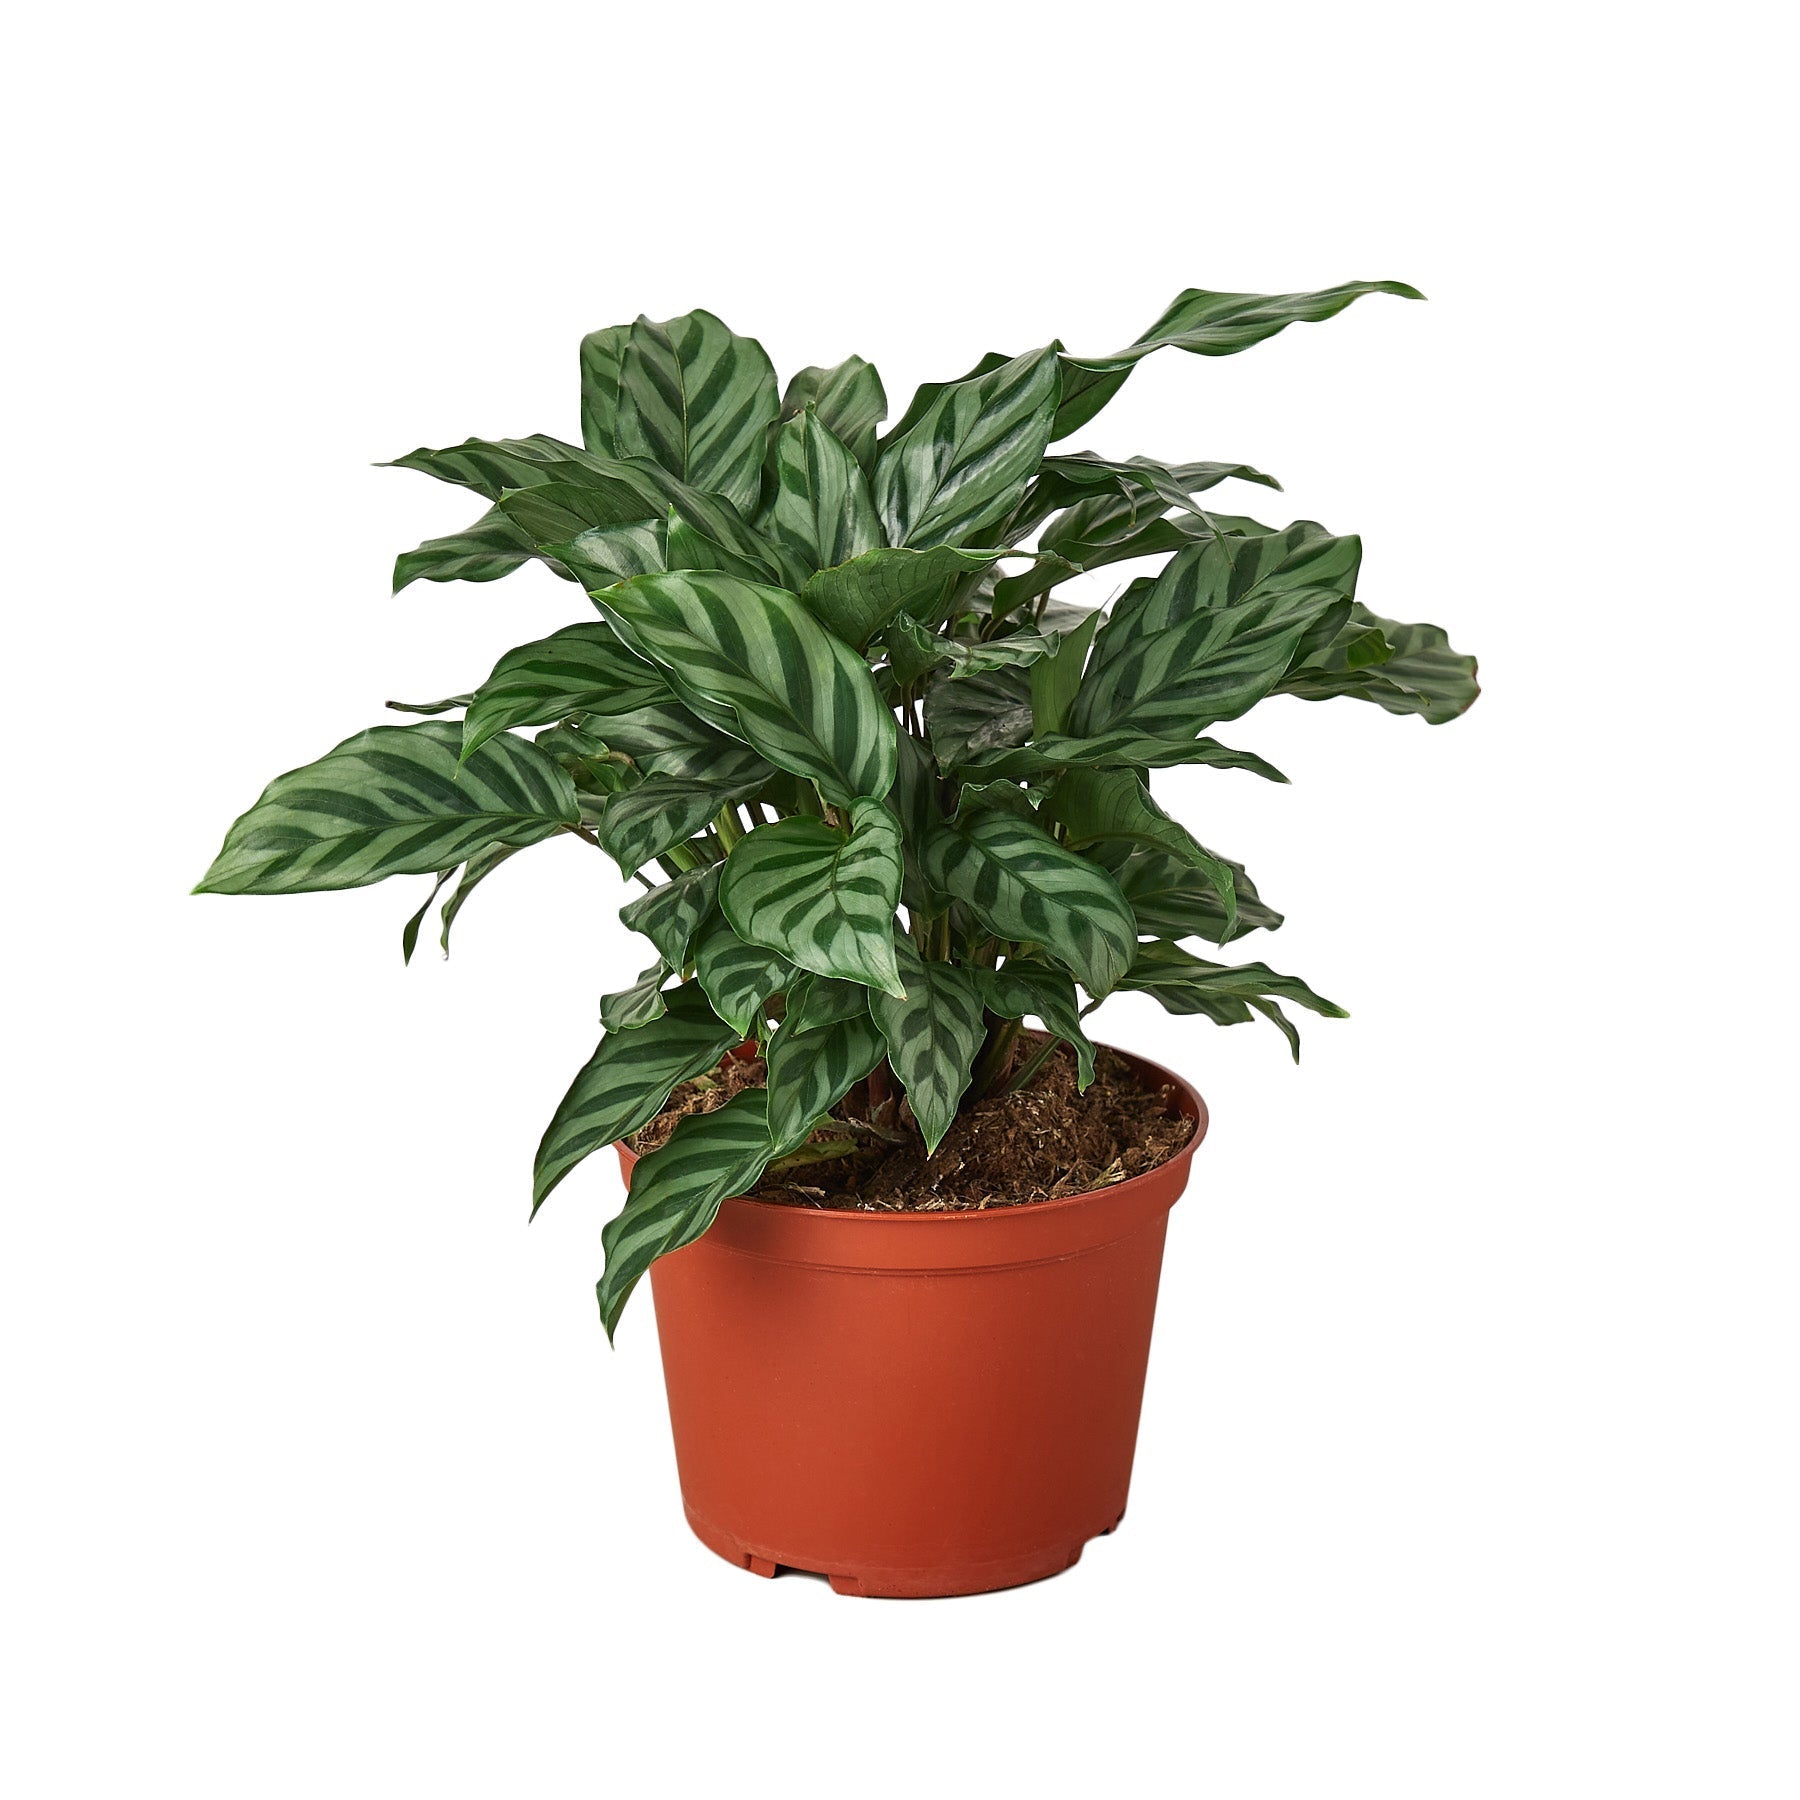 A potted plant with green leaves on a white background, available at the best garden nursery near me.